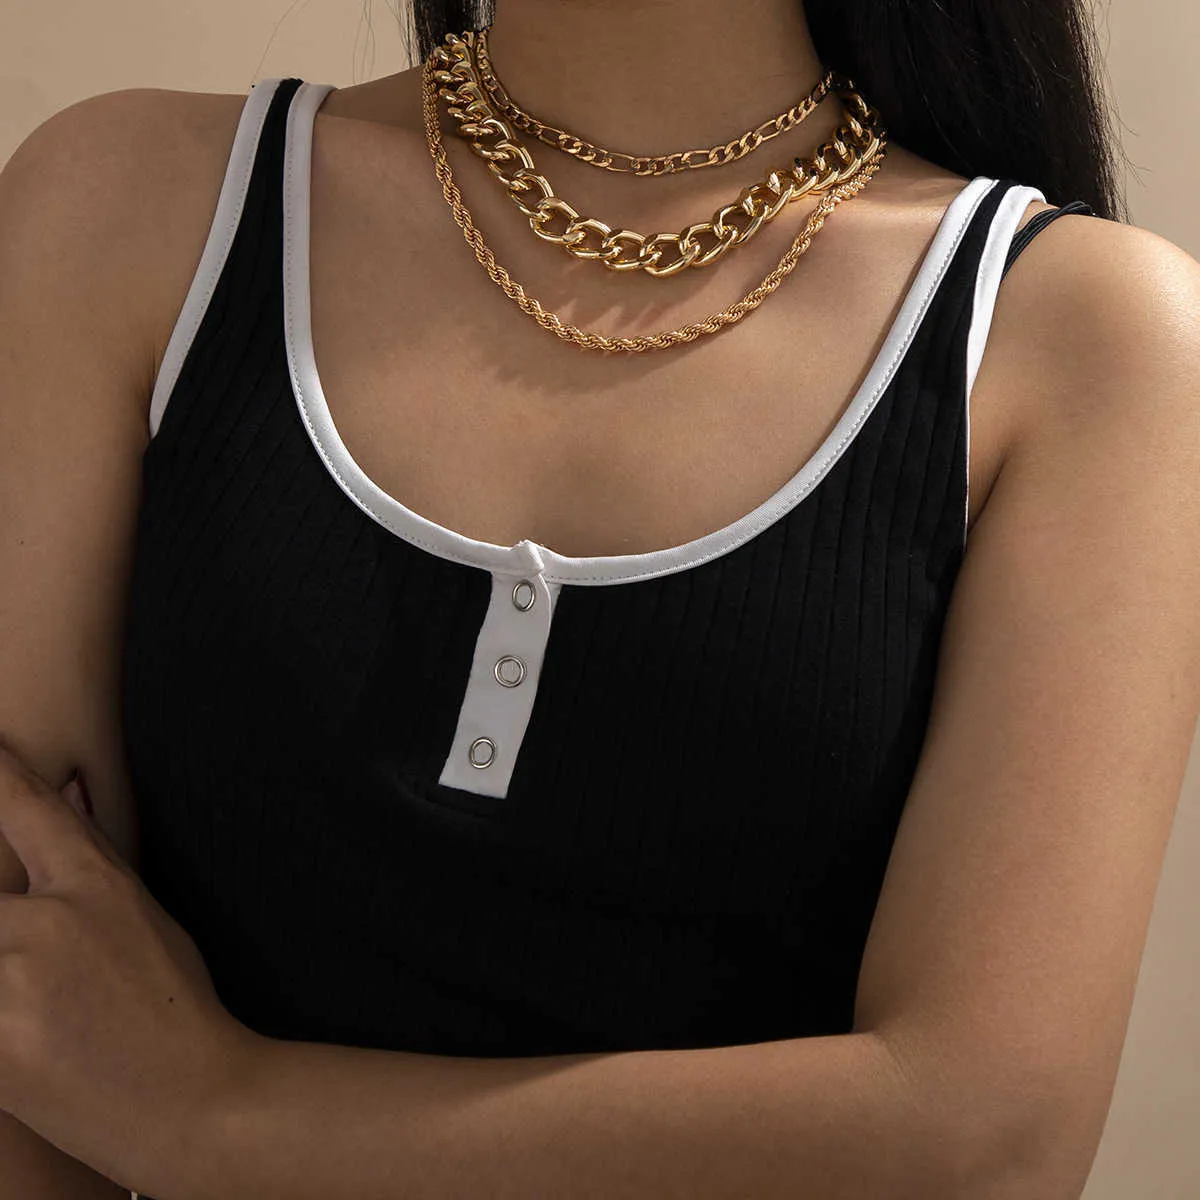 Cuban Chain Rope Chain Necklace Gold Silver Color Choker Set for Women Girls Jewelry Q0809